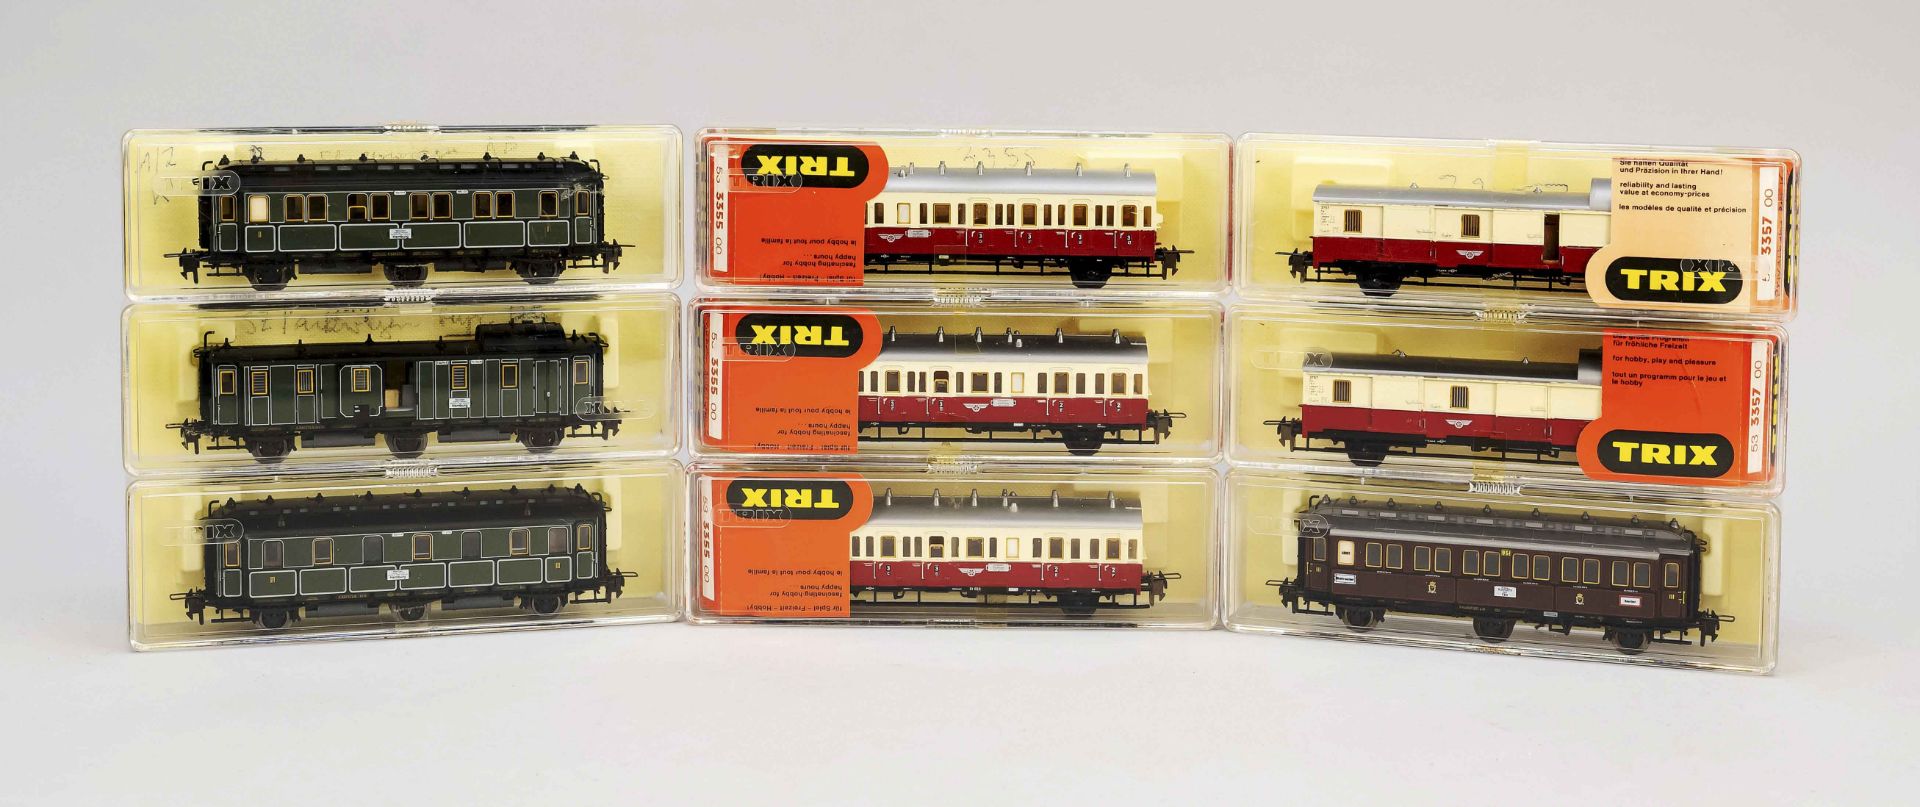 Trix H0 Express Large 32-piece set of passenger cars, including 3x 3356 and 4x 3355 and 2x 3357